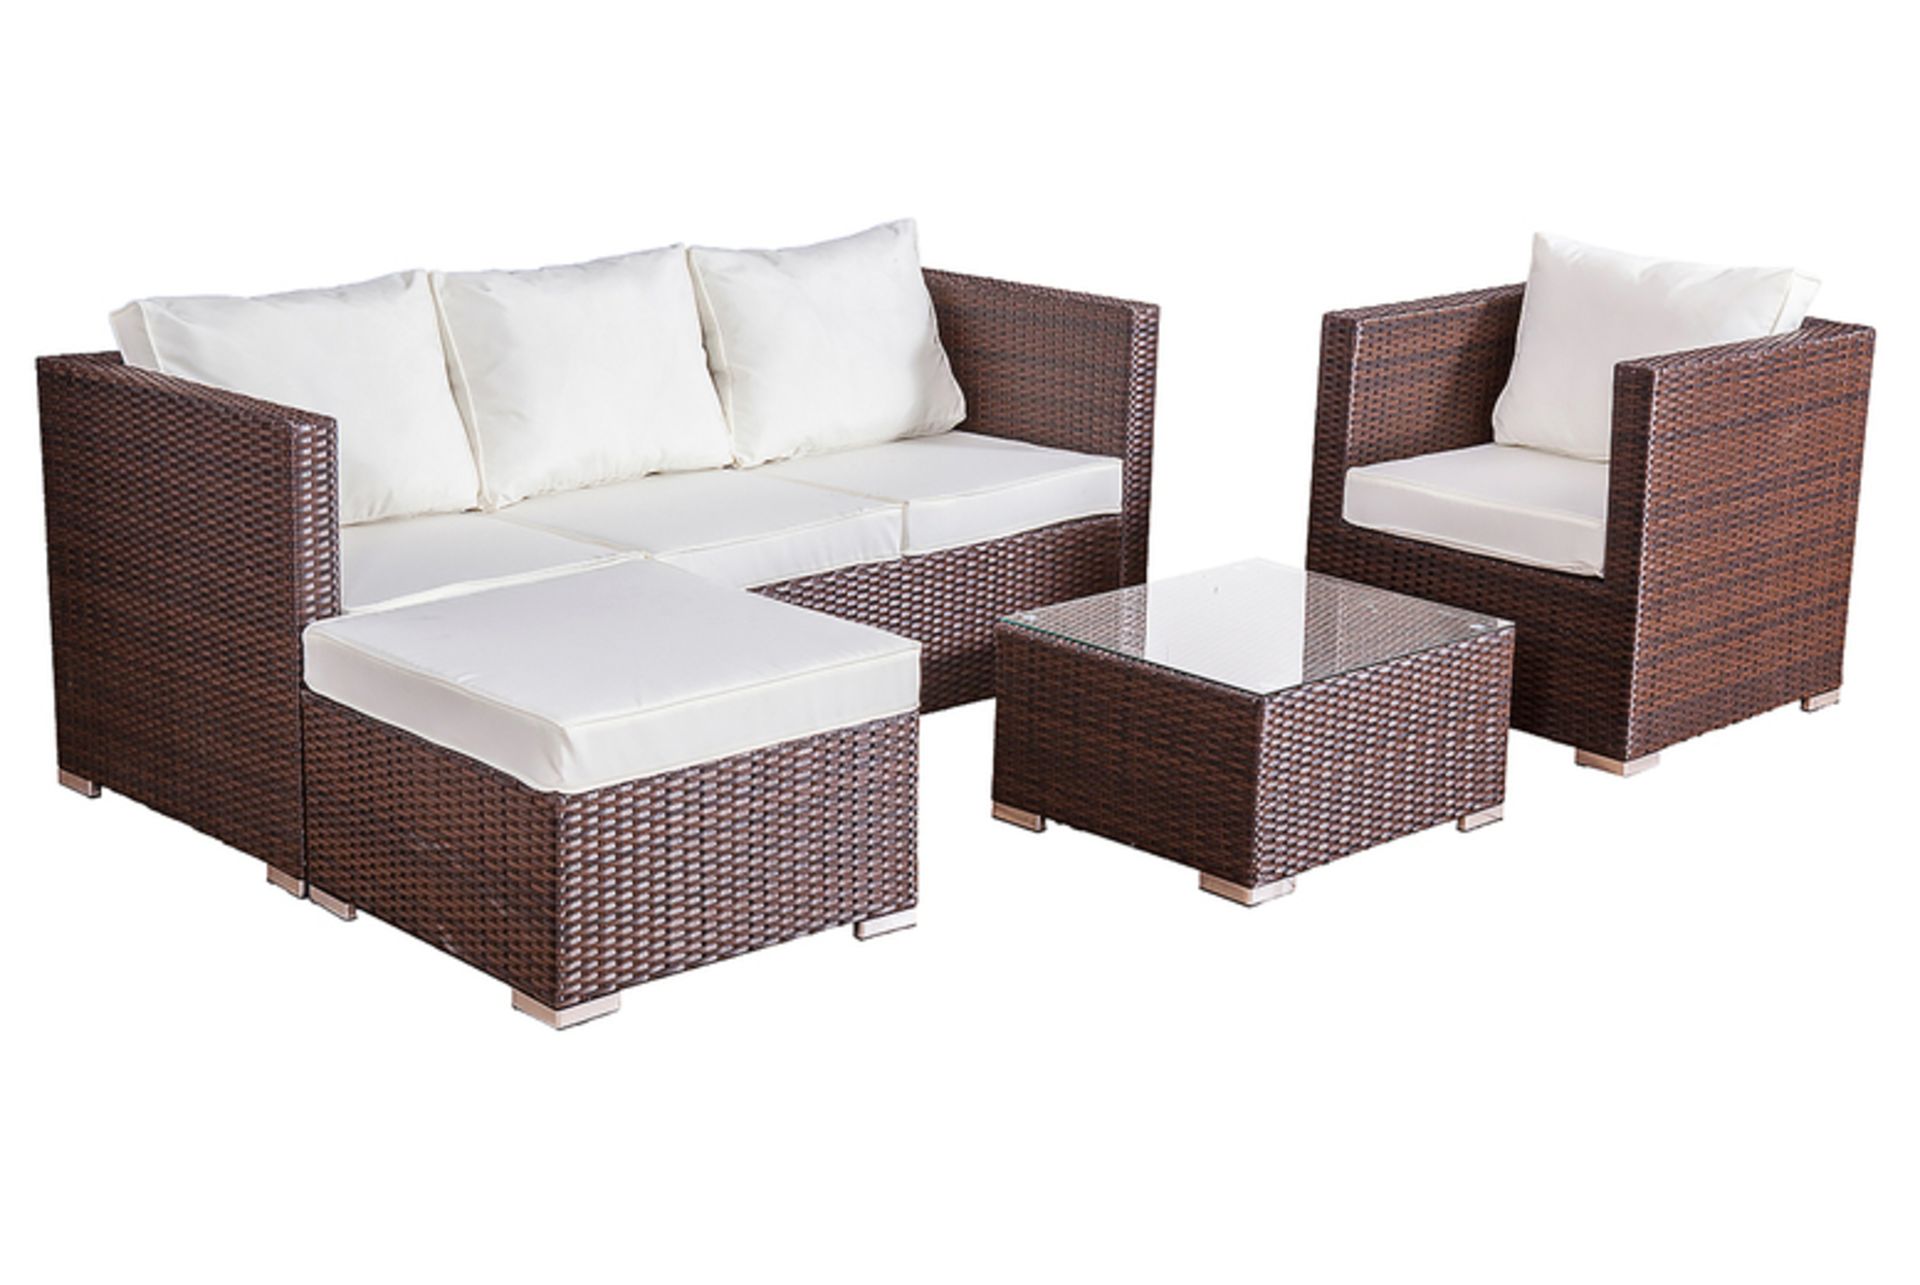 FREE DELIVERY - 5-SEATER CORNER SOFA & ARM CHAIR GARDEN RATTAN FURNITURE SET - BROWN